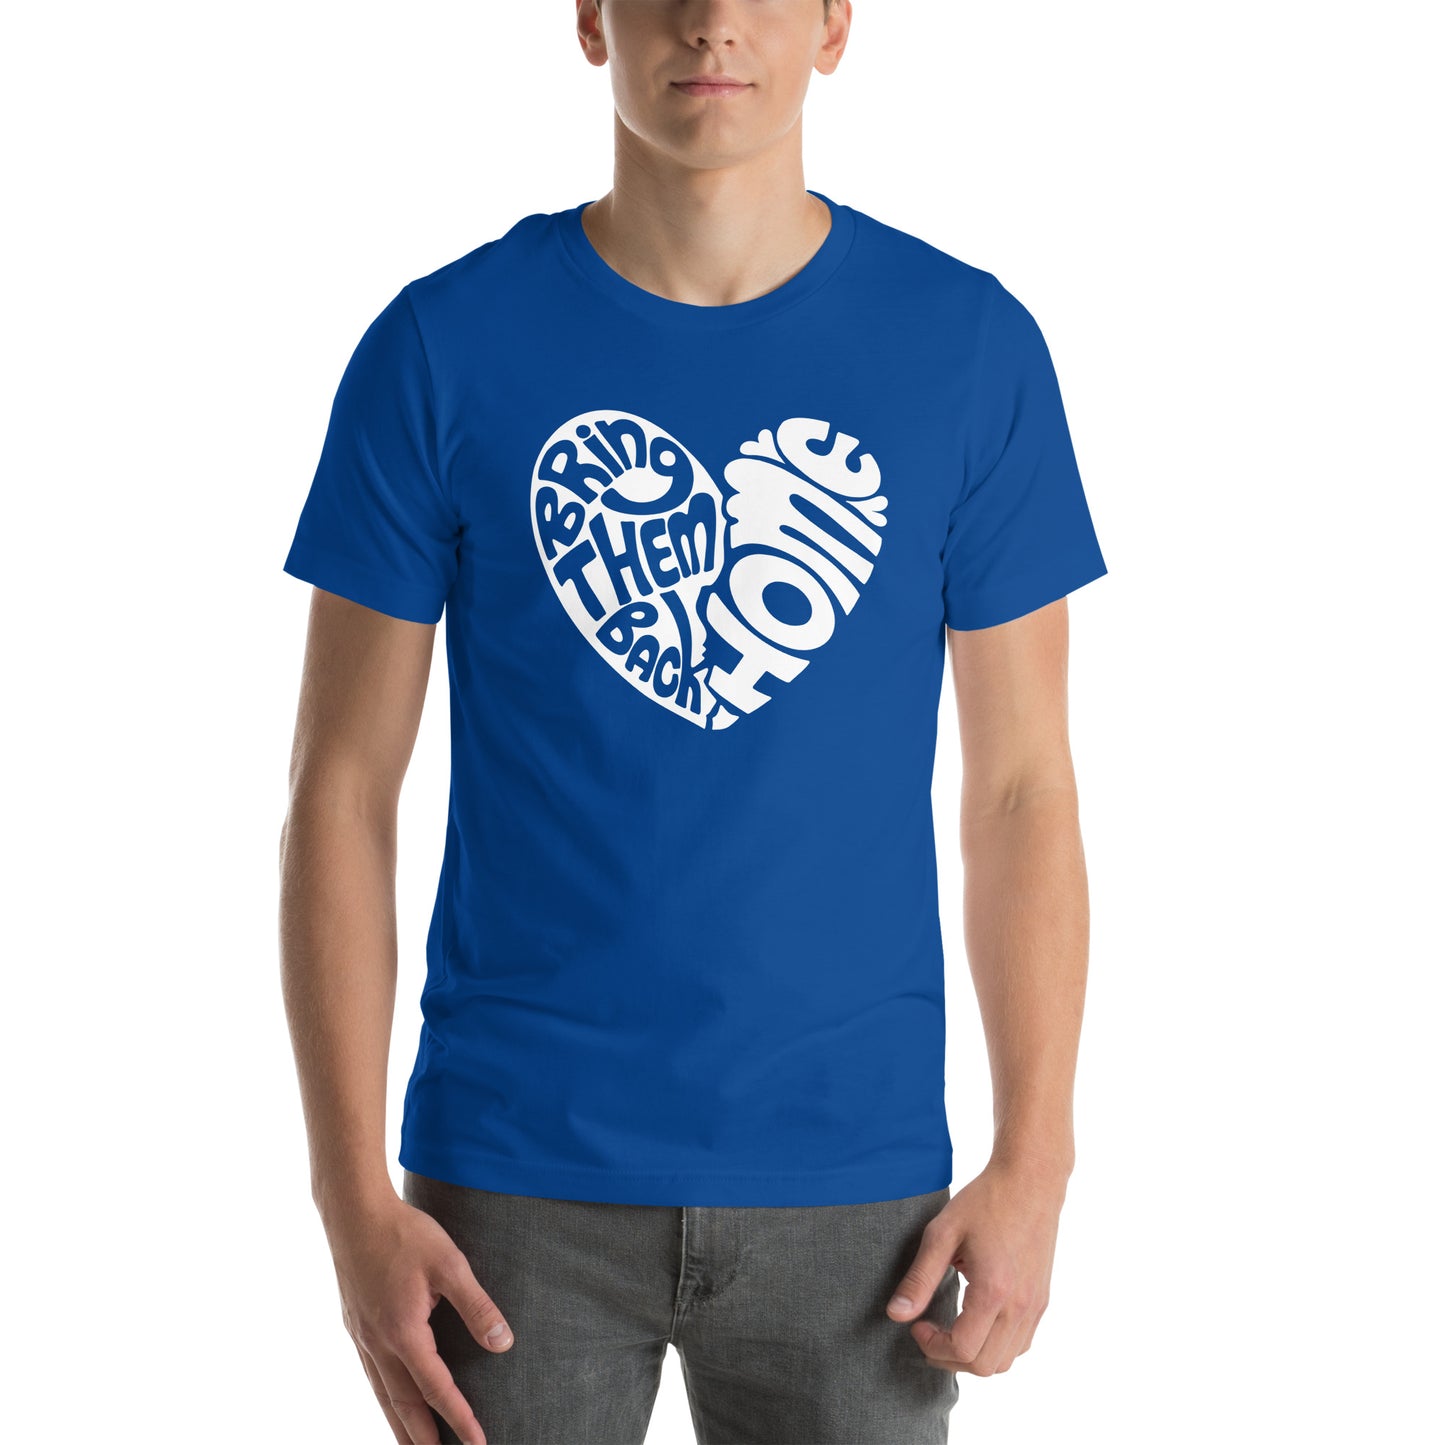 Bring them back home Stand with Israel Unisex t-shirt